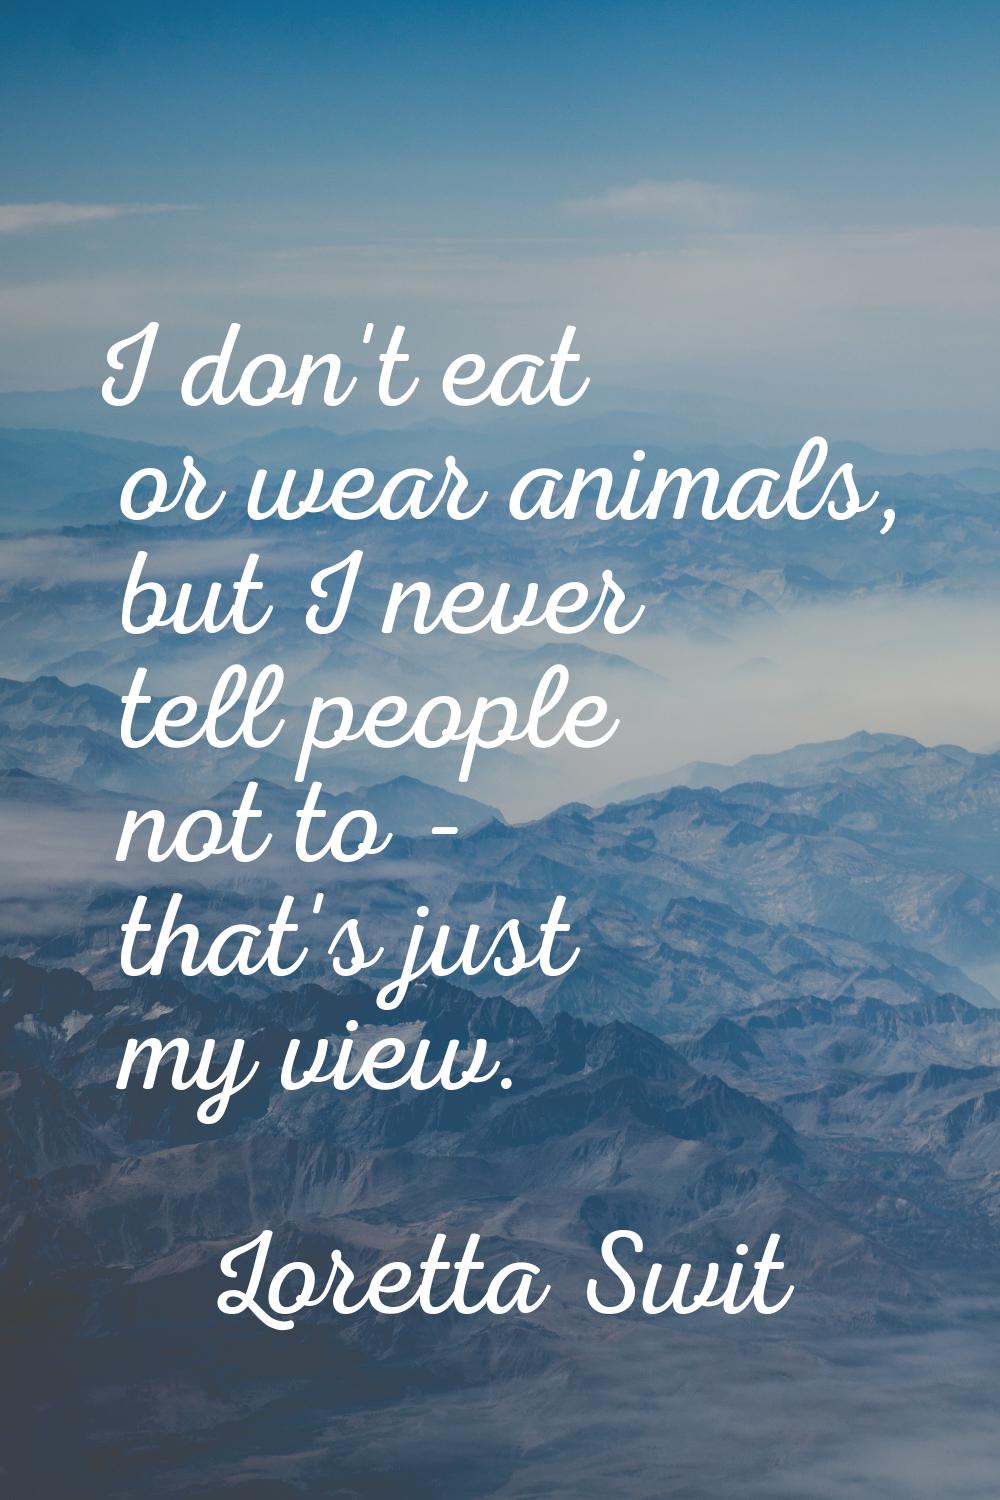 I don't eat or wear animals, but I never tell people not to - that's just my view.